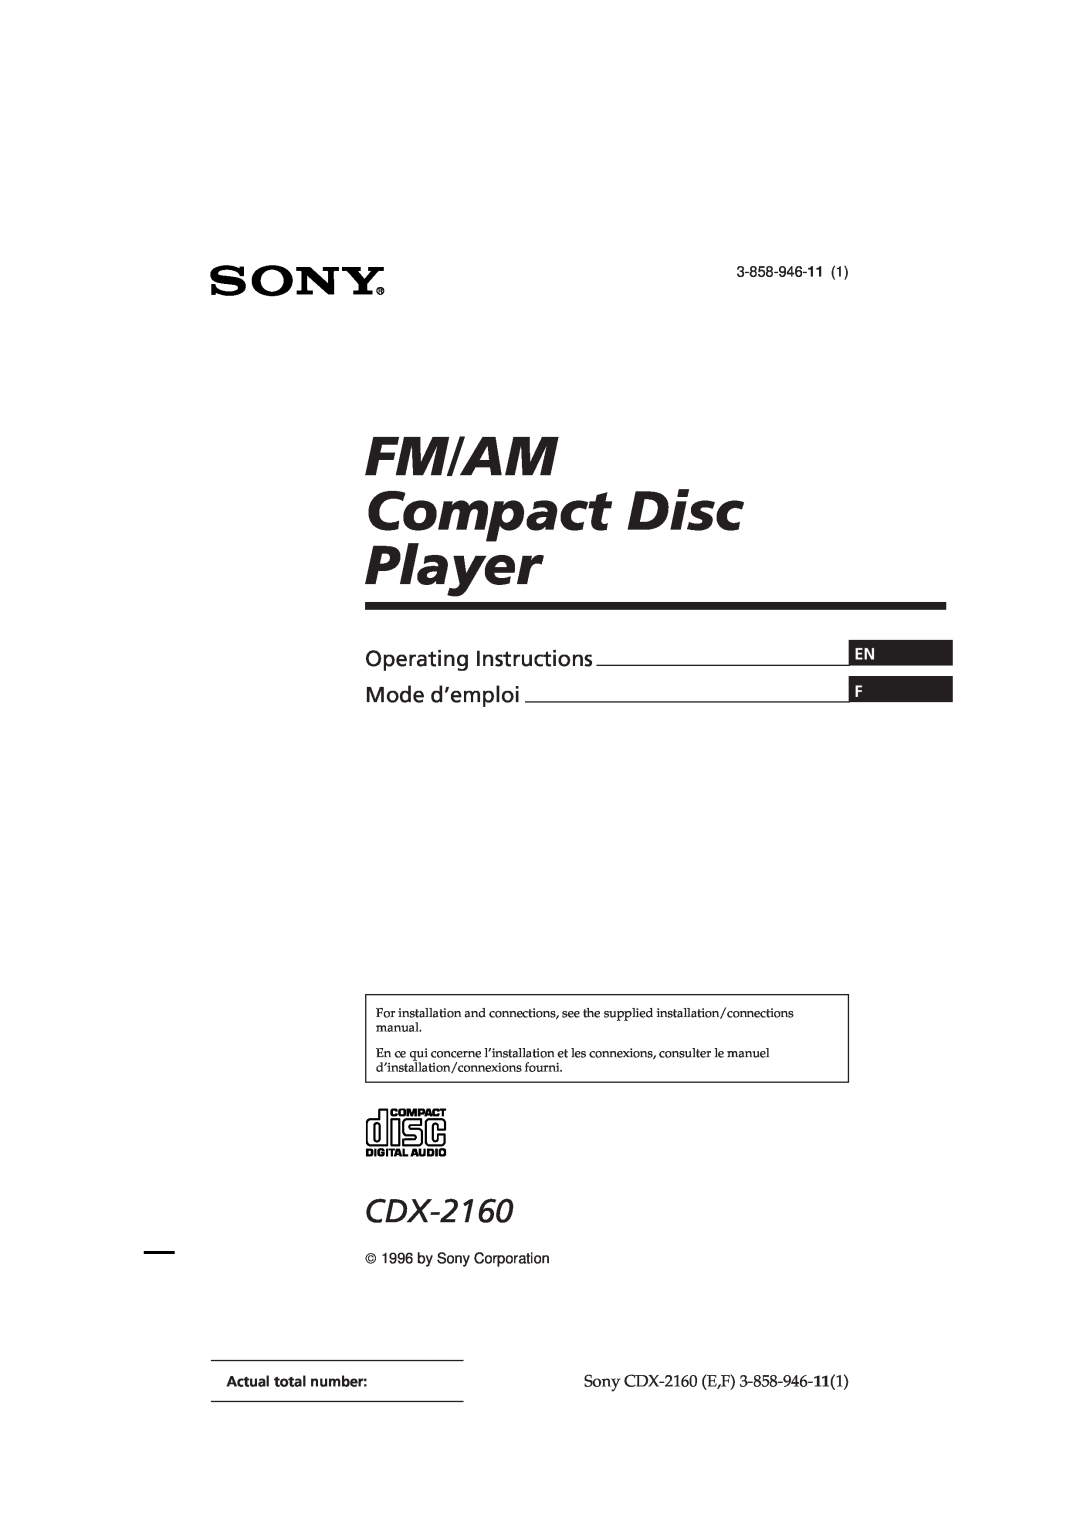 Sony manual FM/AM Compact Disc Player, Operating Instructions Mode d’emploi, En F, Sony CDX-2160E,F, 3-858-946-11 